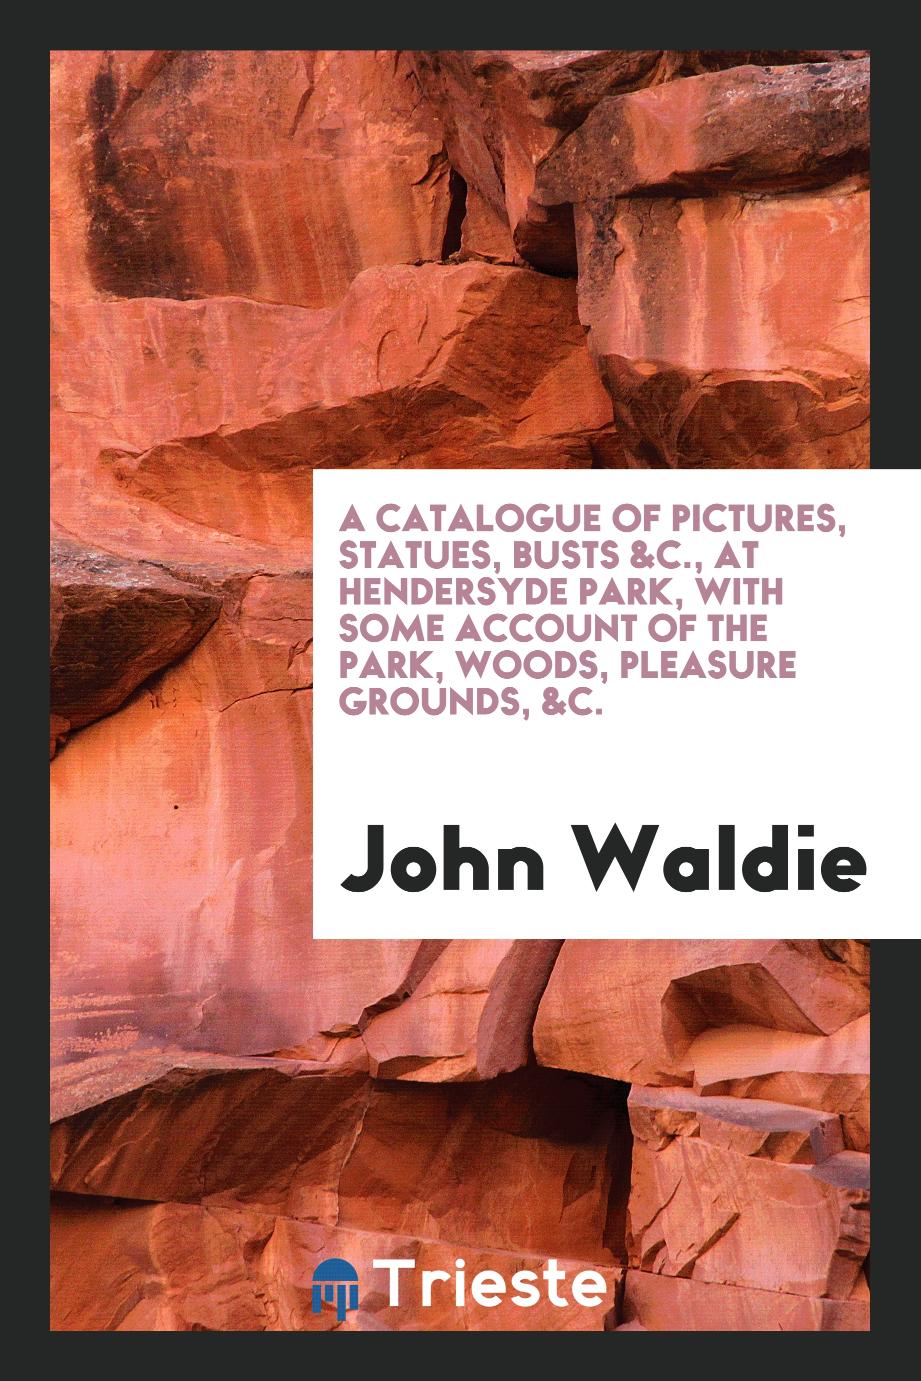 A Catalogue of Pictures, Statues, Busts &C., at Hendersyde Park, with Some Account of the Park, Woods, Pleasure Grounds, &c.